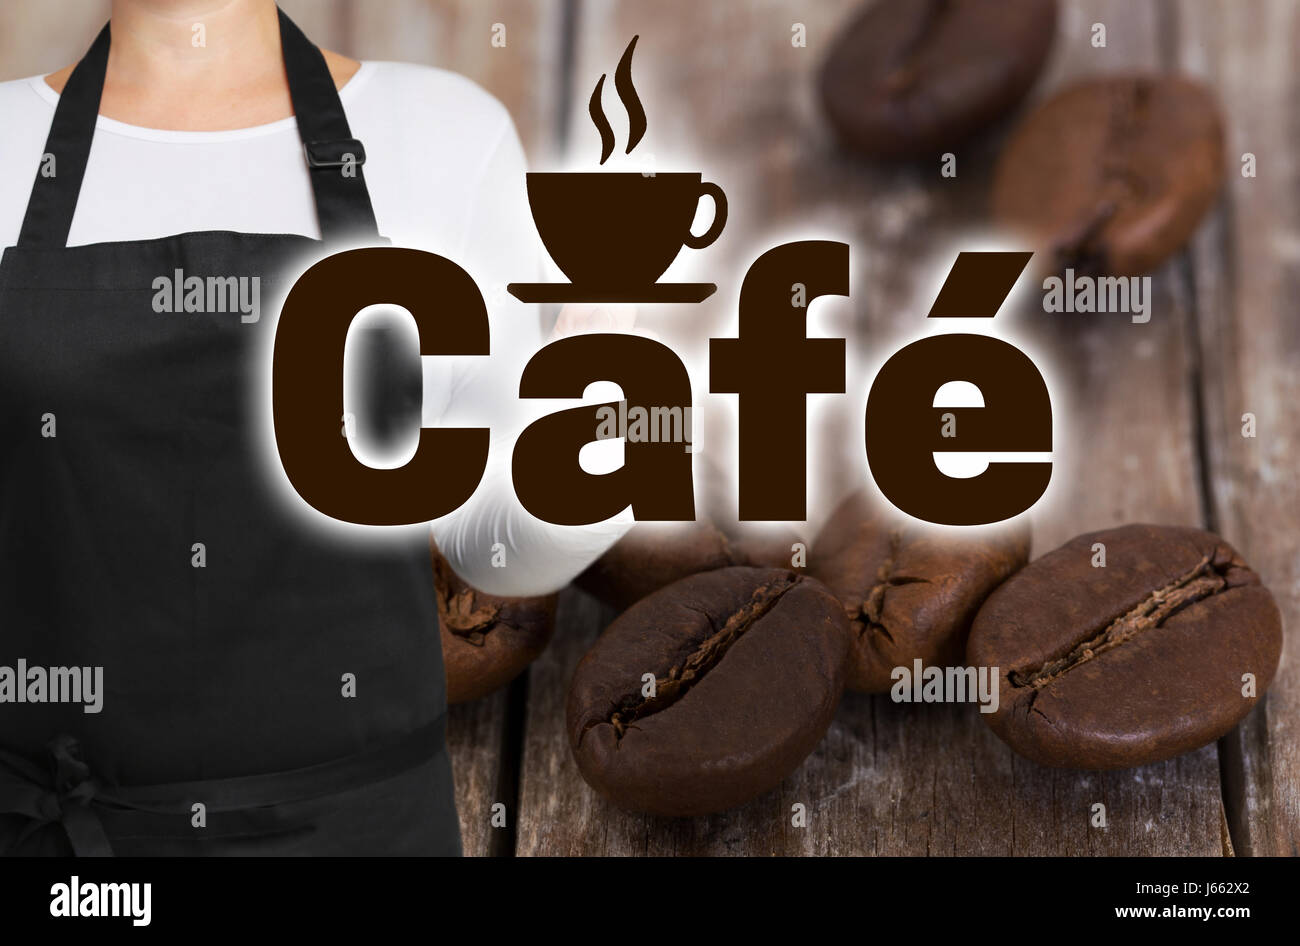 Cafe concept is shown by coffee roasters. Stock Photo